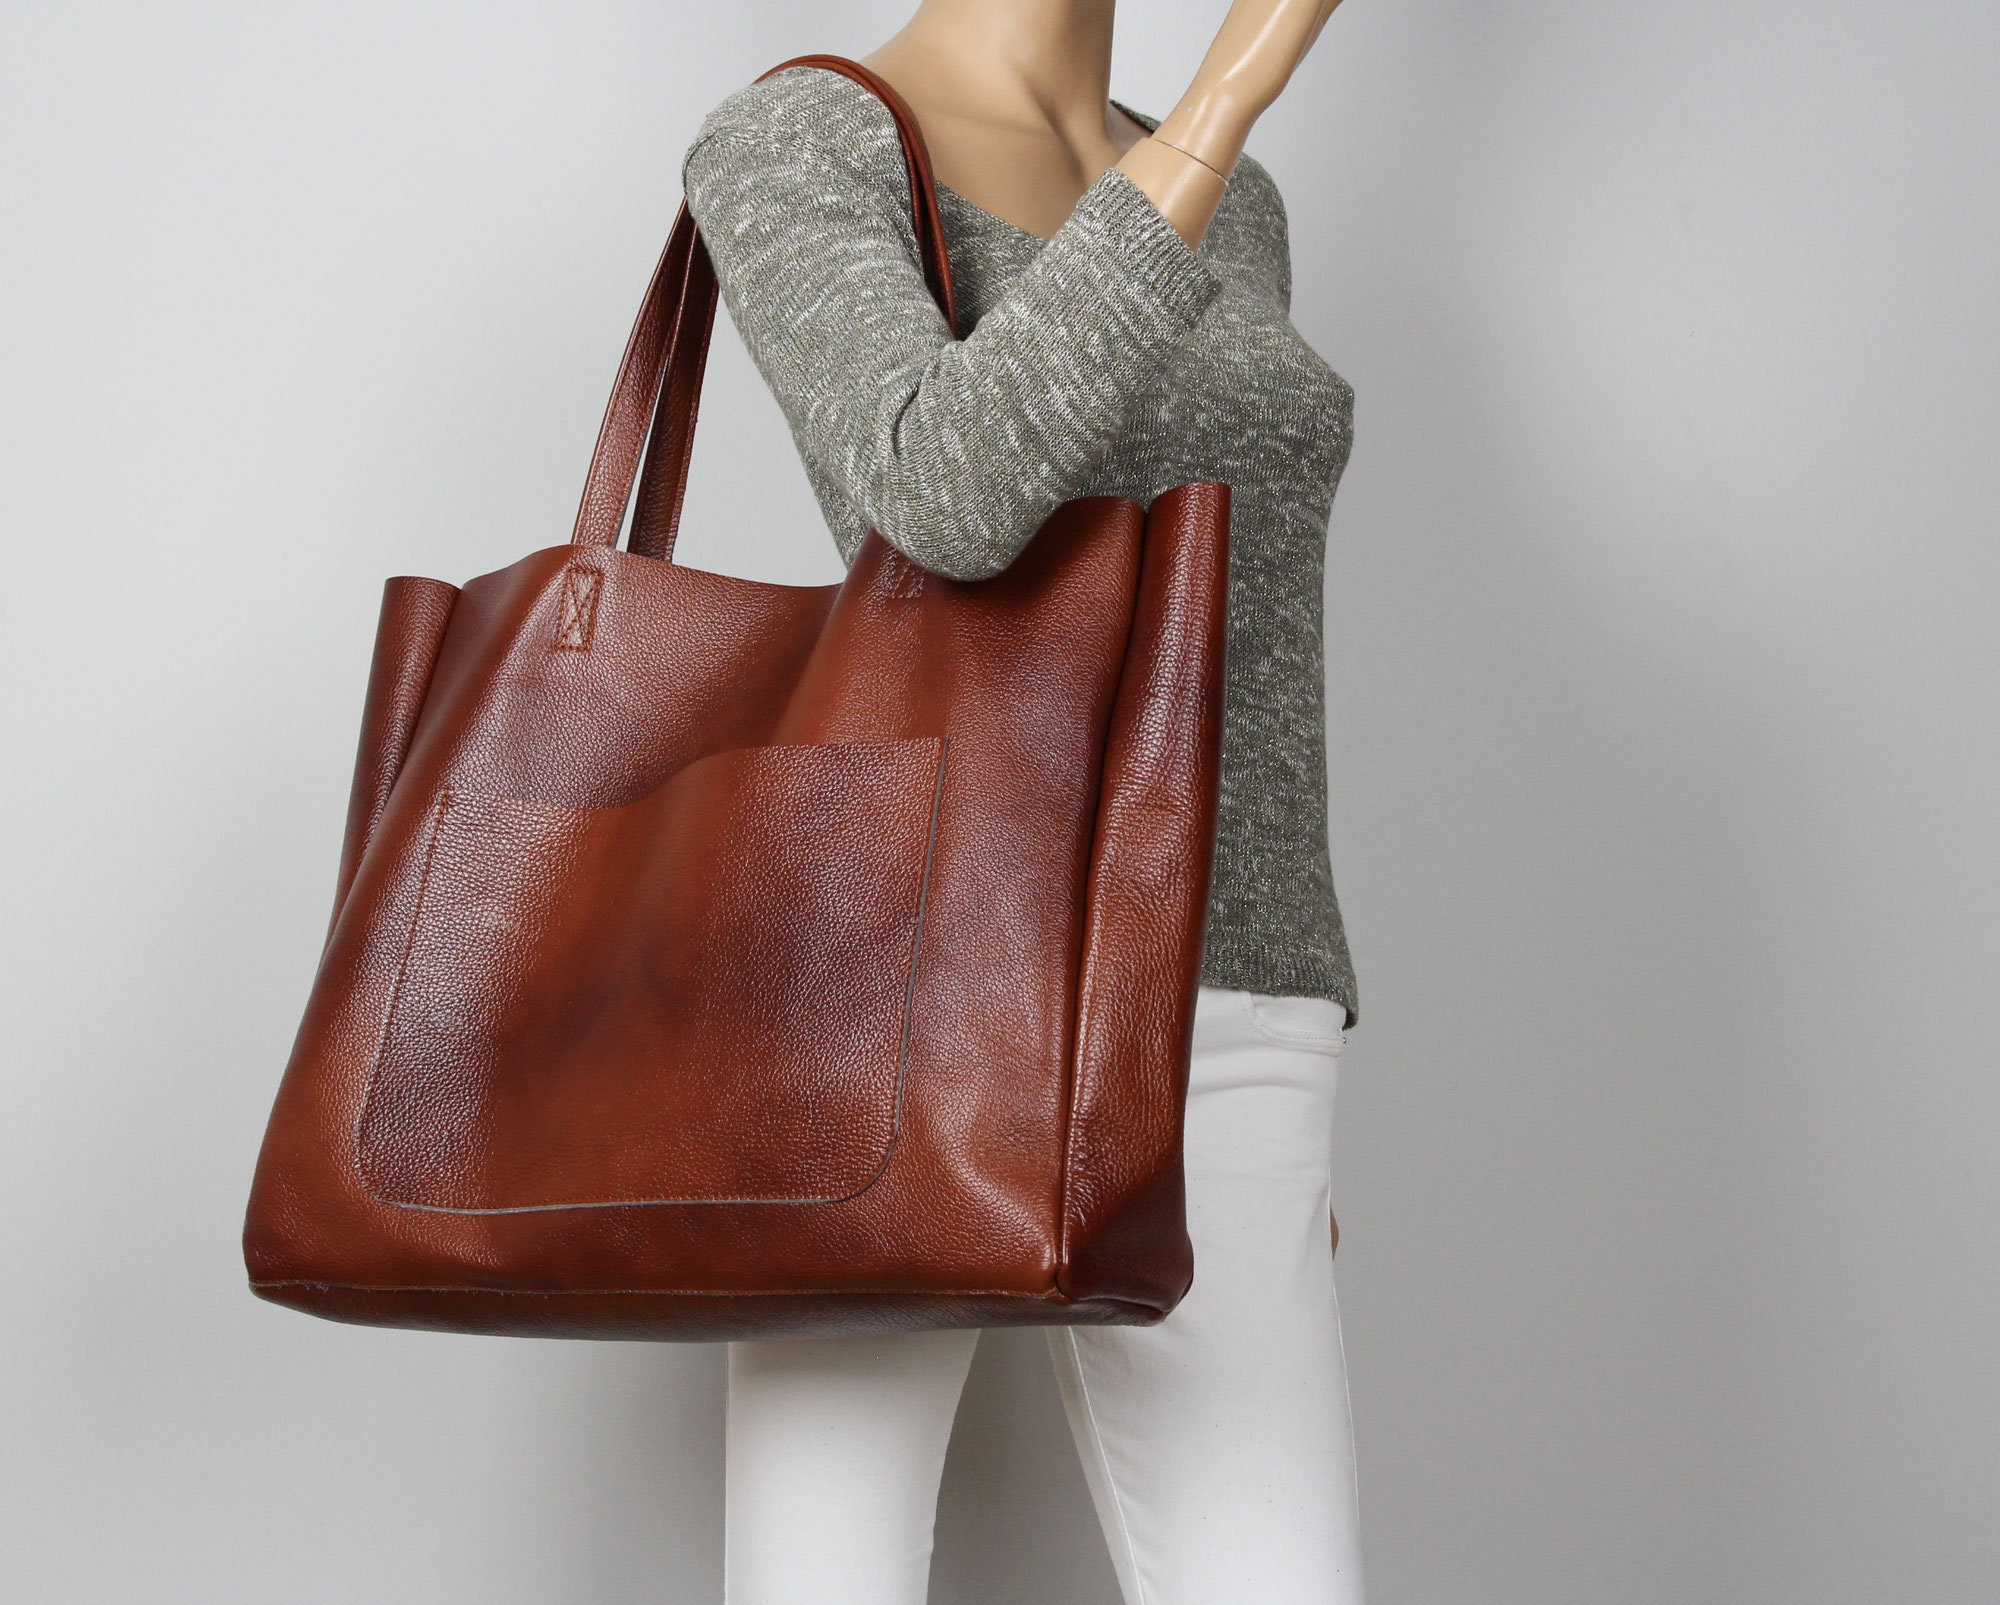 Large Leather Brown Tote Cognac Brown Handbag for Women Soft - Etsy